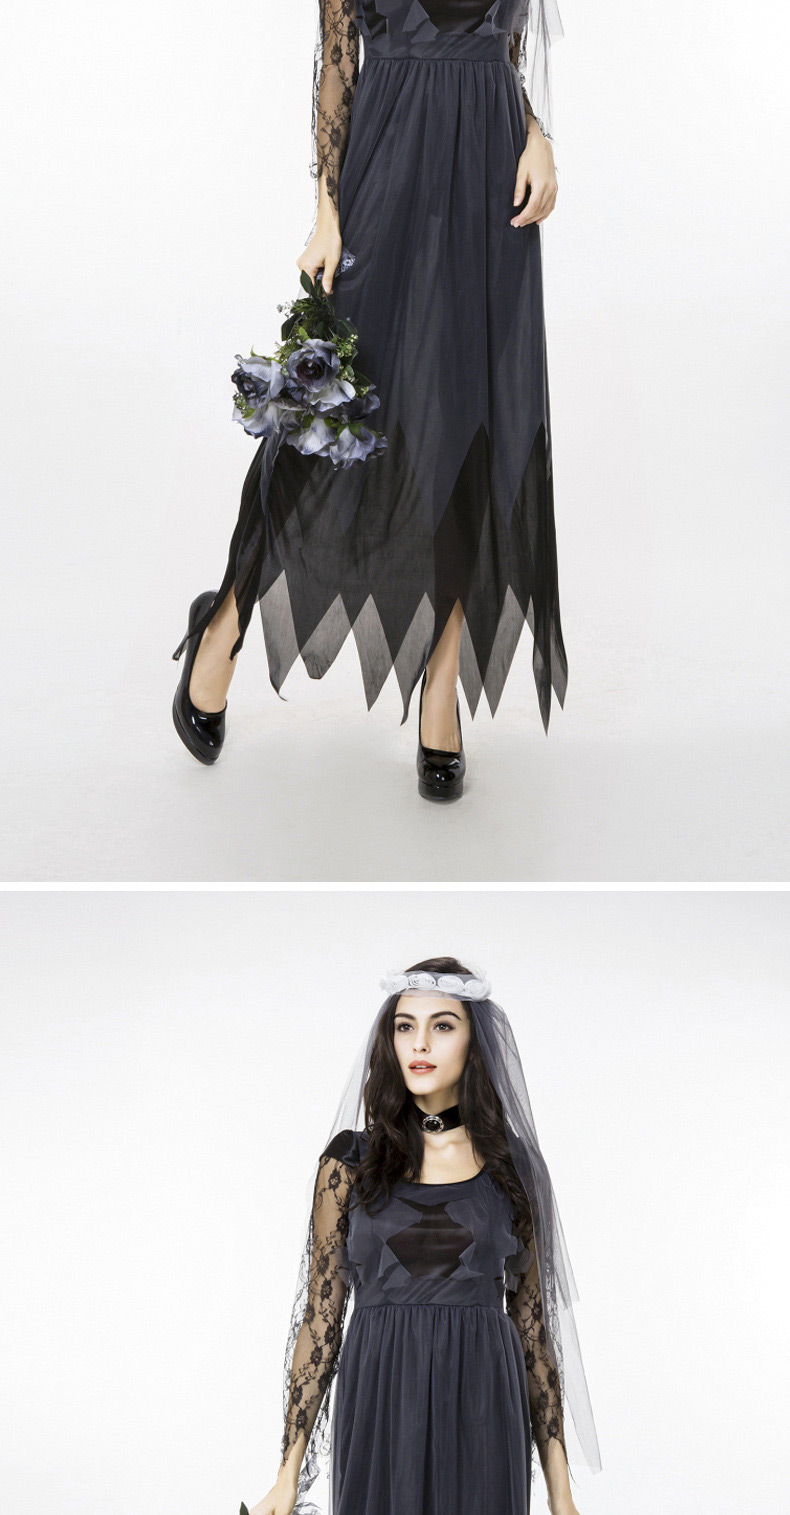 Fashion Black Ghost Bride Decorated Costume,Festival & Party Supplies